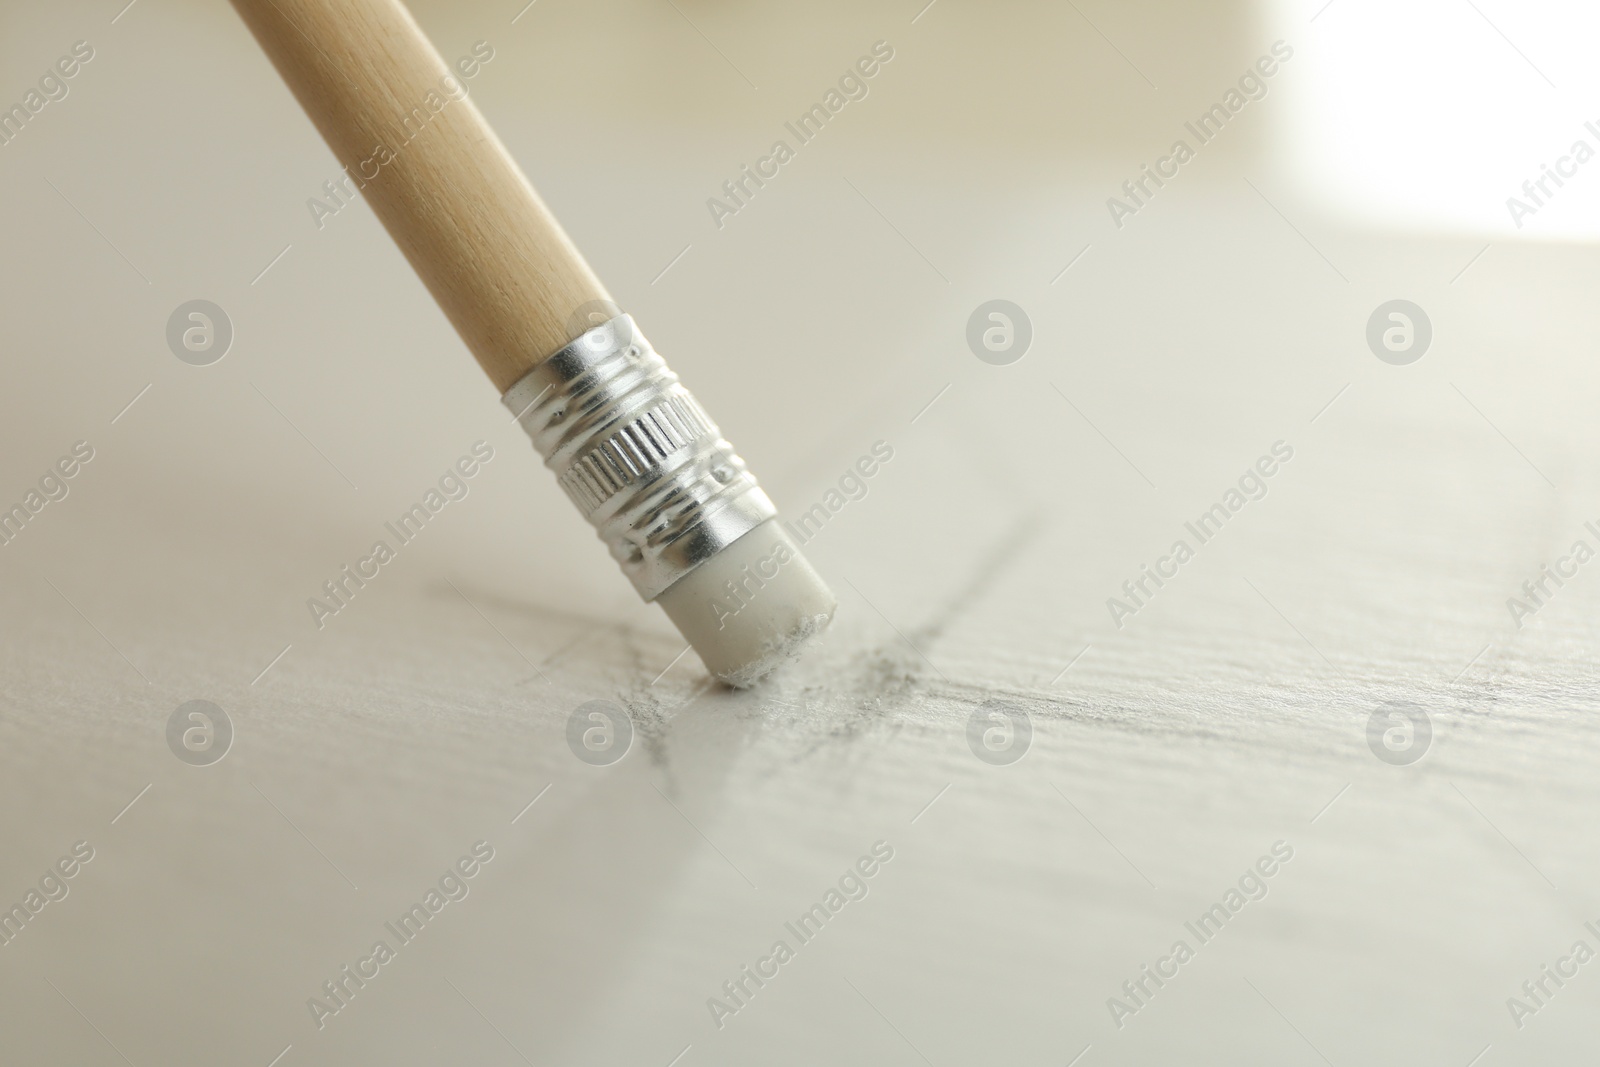 Photo of Correcting picture on paper with pencil eraser, closeup view